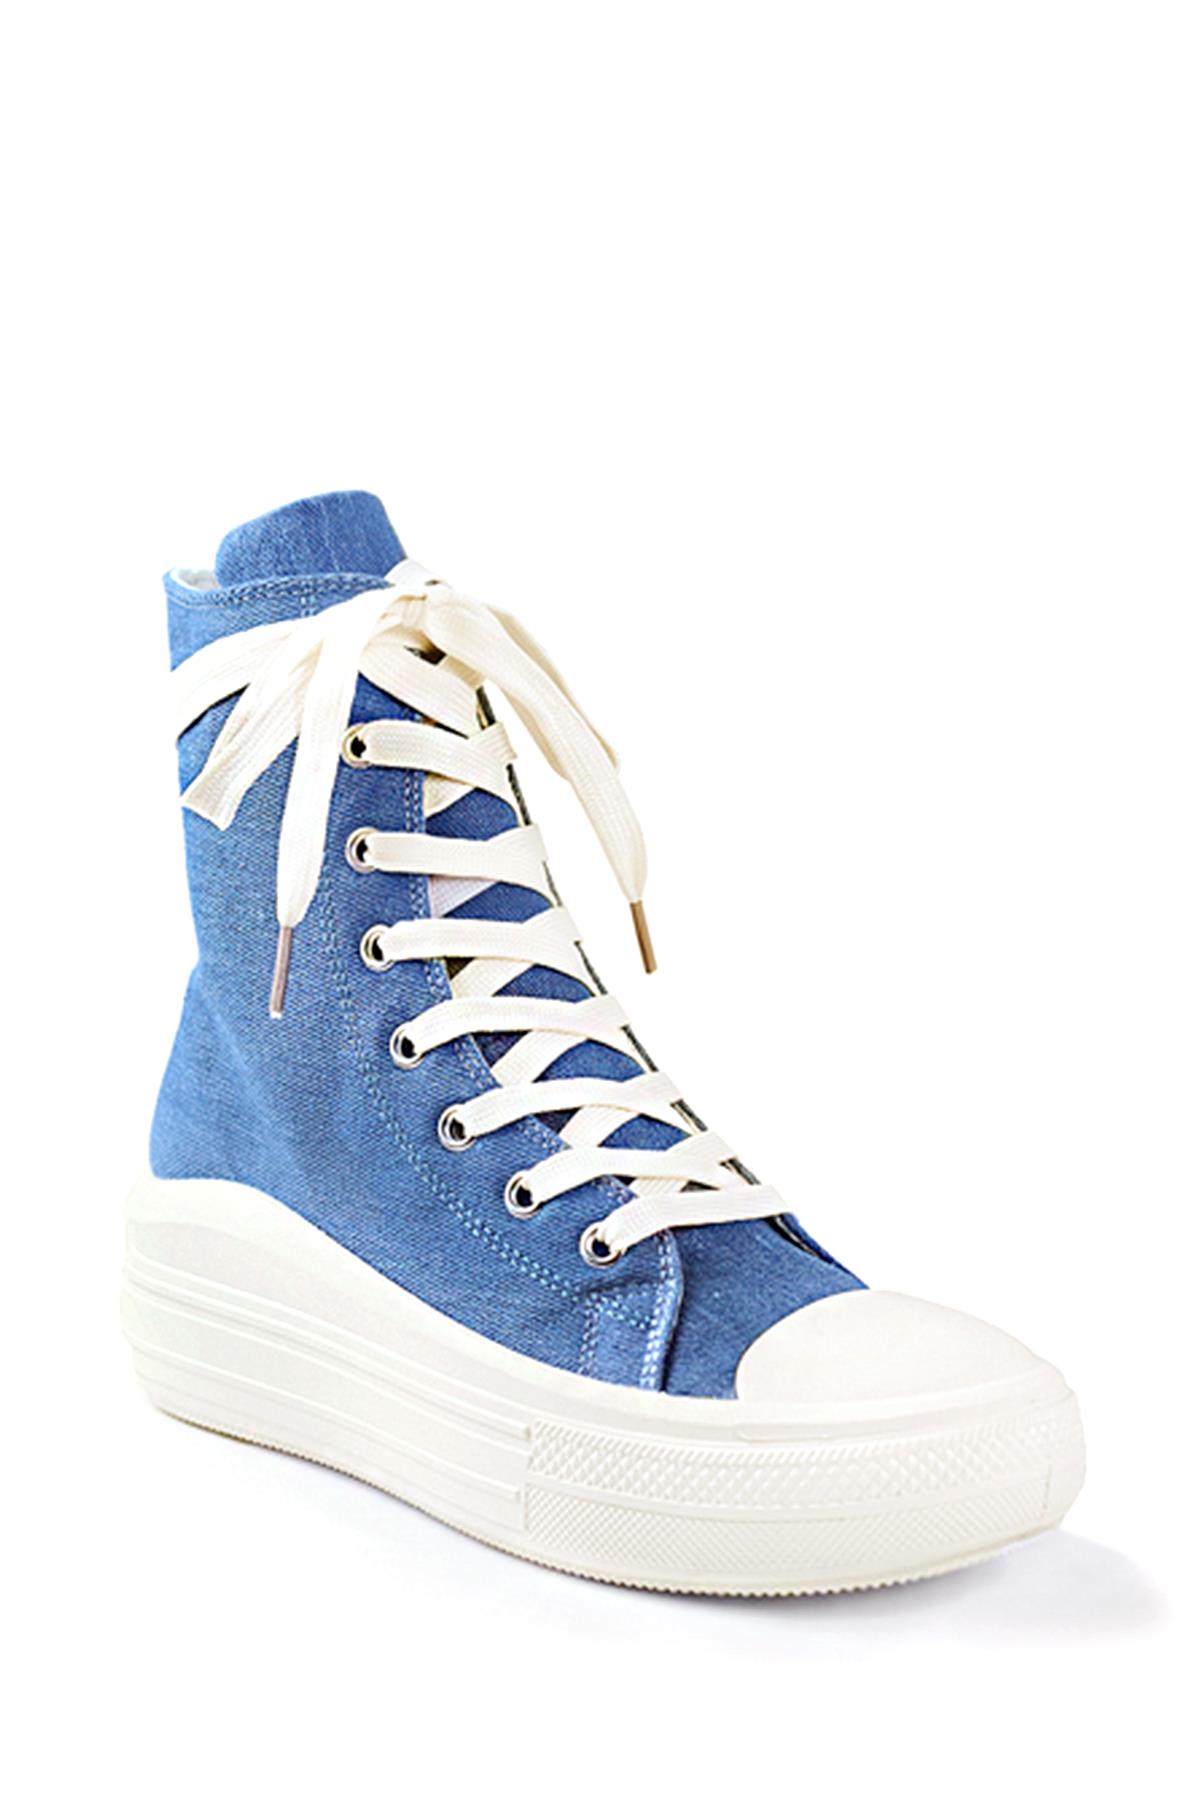 HIGH TOP LACE UP SNEAKERS 12 PAIRS